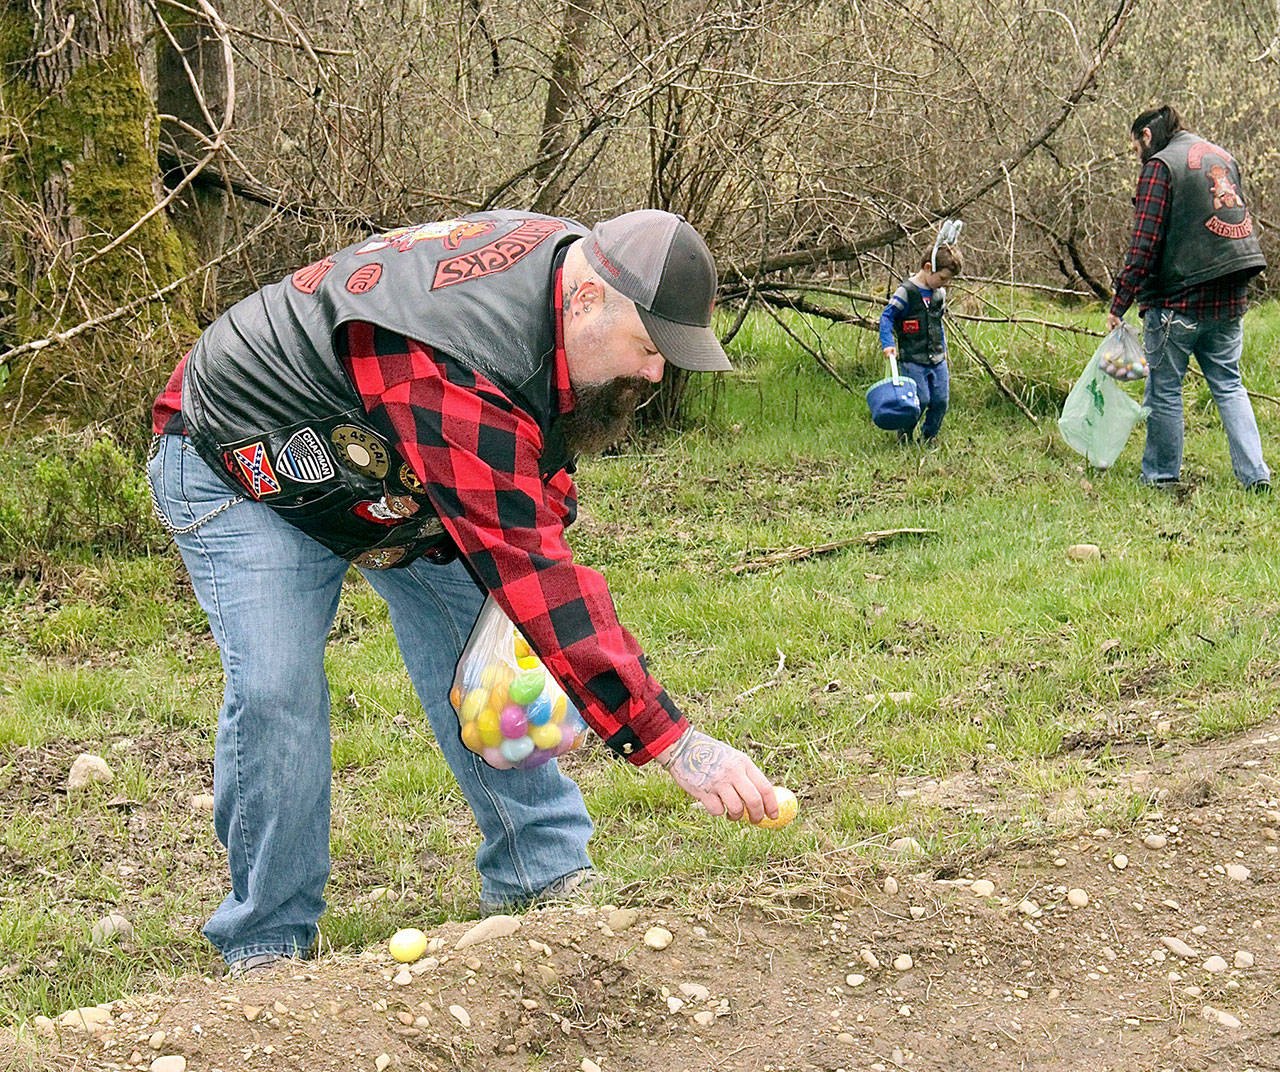 Jason Chapman, a member of the Clallam County chapter of the Roughnecks Motorcycle Club, places an egg in a clearing near West 10th Street and Estes Court in west Port Angeles on Saturday so that neighborhood children could hunt Easter eggs today. Egg My Yard is a fundraising project for the nonprofit group made up of law enforcement and first responders. It will support their annual “Shop with a Roughneck” in December. Club members take Clallam County foster children Christmas shopping, giving each child $100 to spend. (Dave Logan/for Peninsula Daily News)